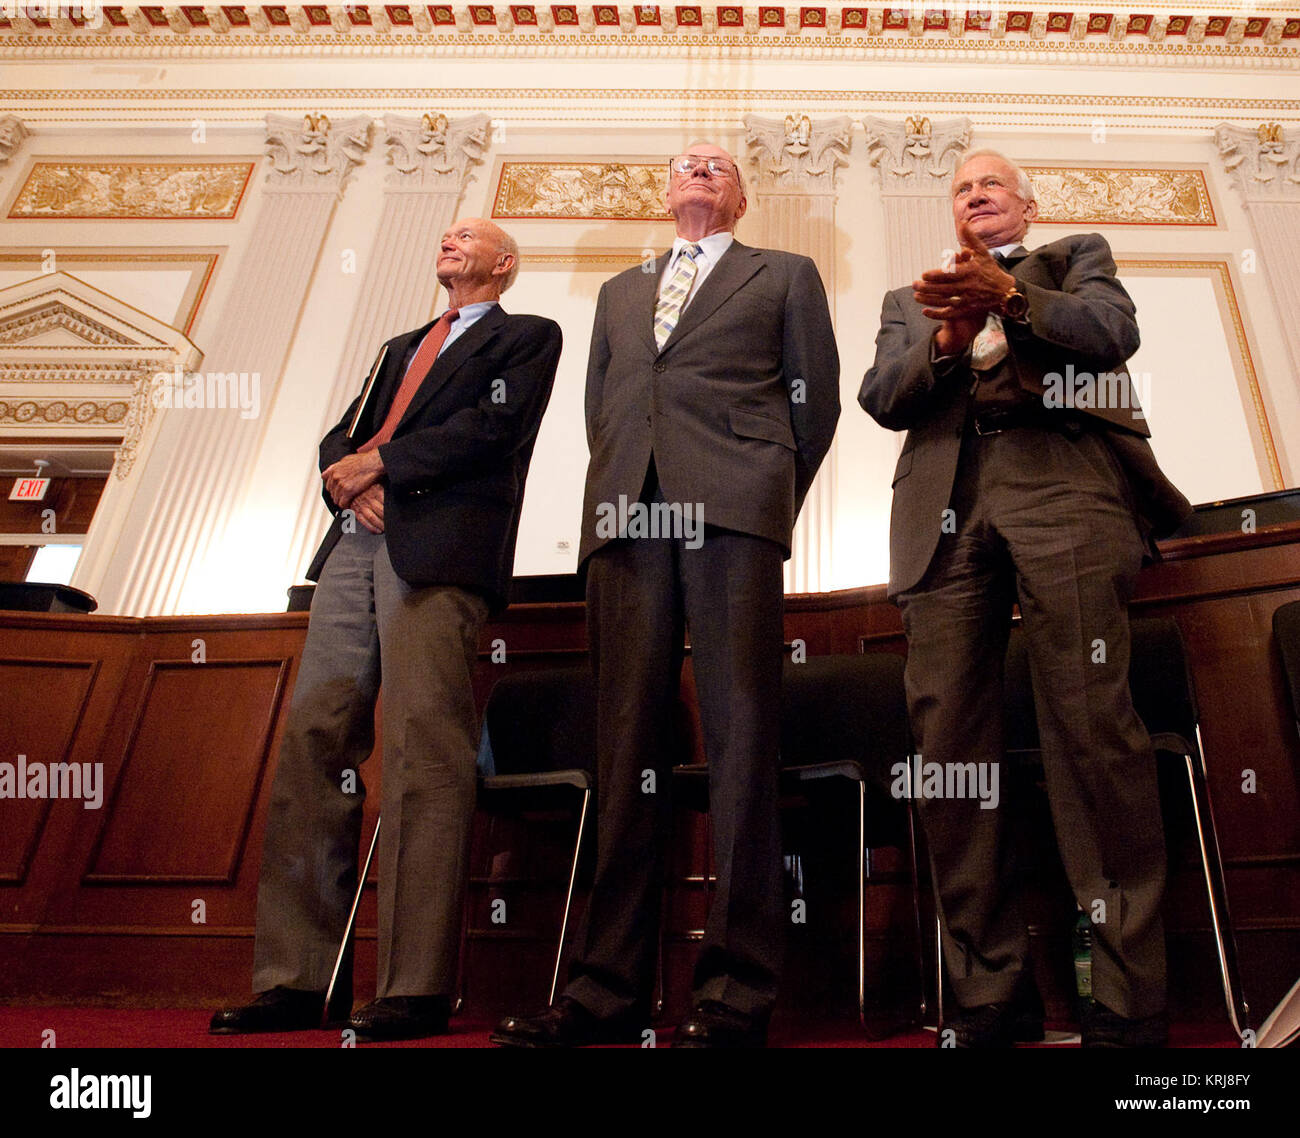 Apollo 11 Astronauts, from left, Michael Collins, Neil Armstrong, and Buzz Aldrin stand in recognition of Astronaut John Glenn during the U.S House of Representatives Committee on Science and Technology tribute to the Apollo 11 Astronauts at the Cannon House Office Building on Capitol Hill, Tuesday, July 21, 2009 in Washington.  The committee presented the three Apollo 11 astronauts with a framed copy of House Resolution 607 honoring their achievement, and announced passage of legislation awarding them and John Glenn the Congressional Gold Medal.  Photo Credit: (NASA/Bill Ingalls) Apollo 11 cr Stock Photo